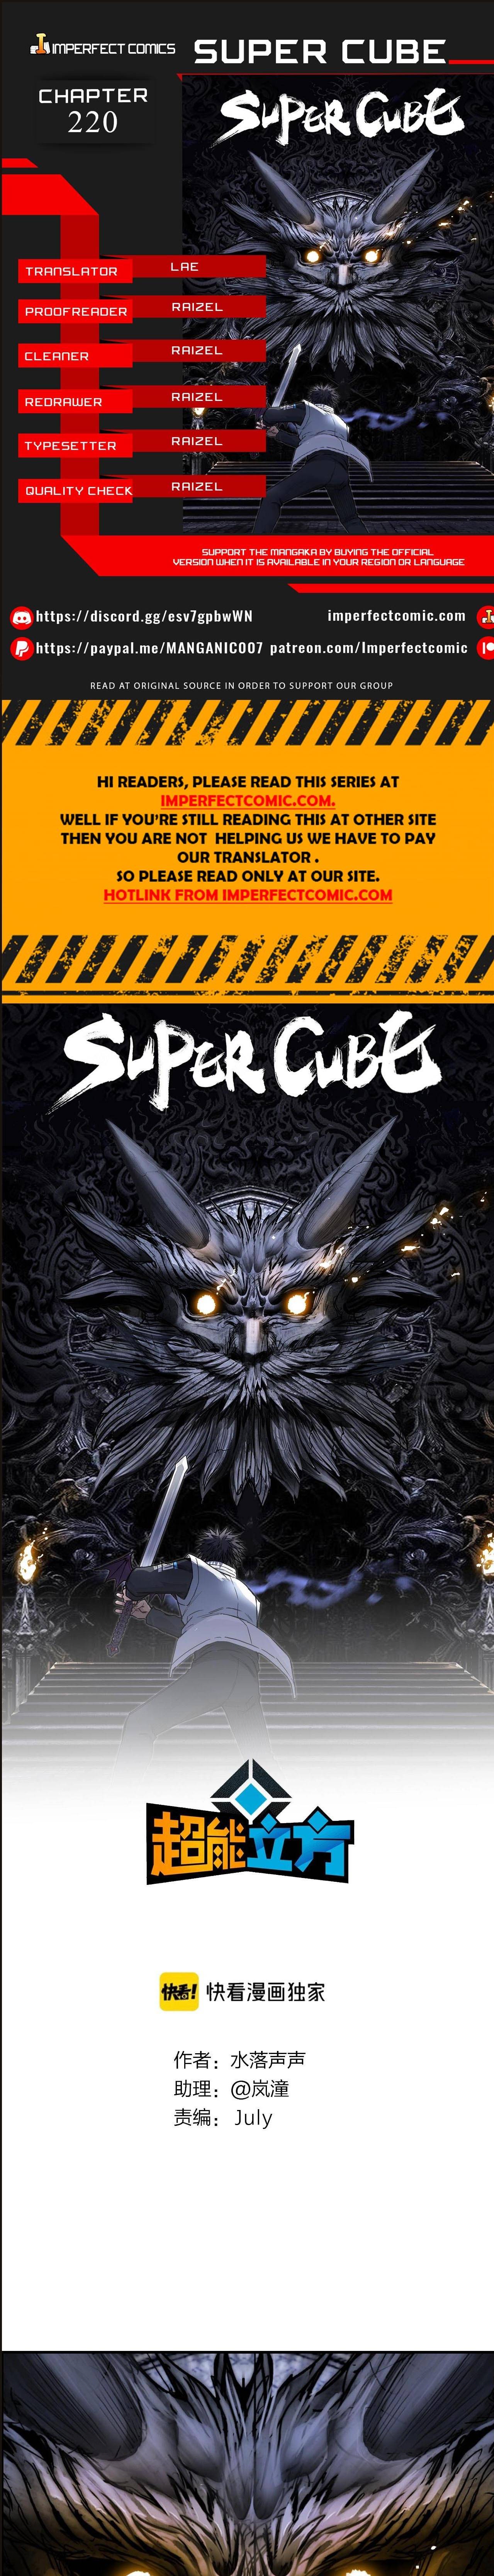 Super Cube Chapter 220